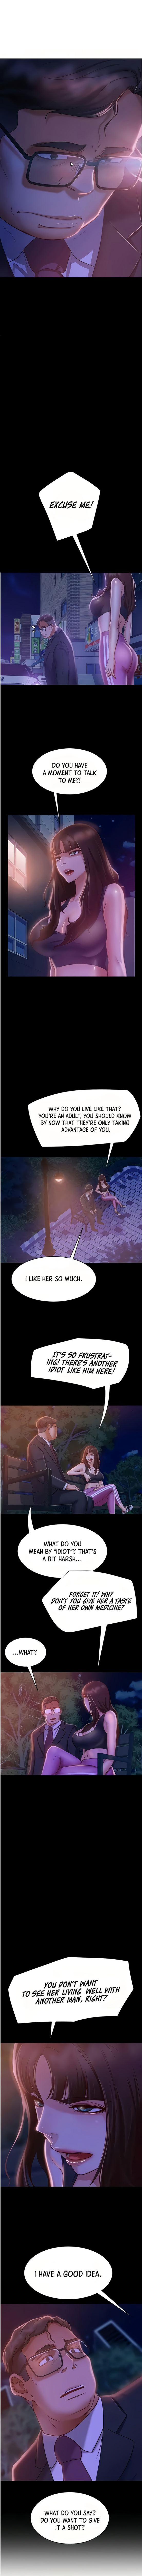 A Twisted Day - Chapter 23 Page 8